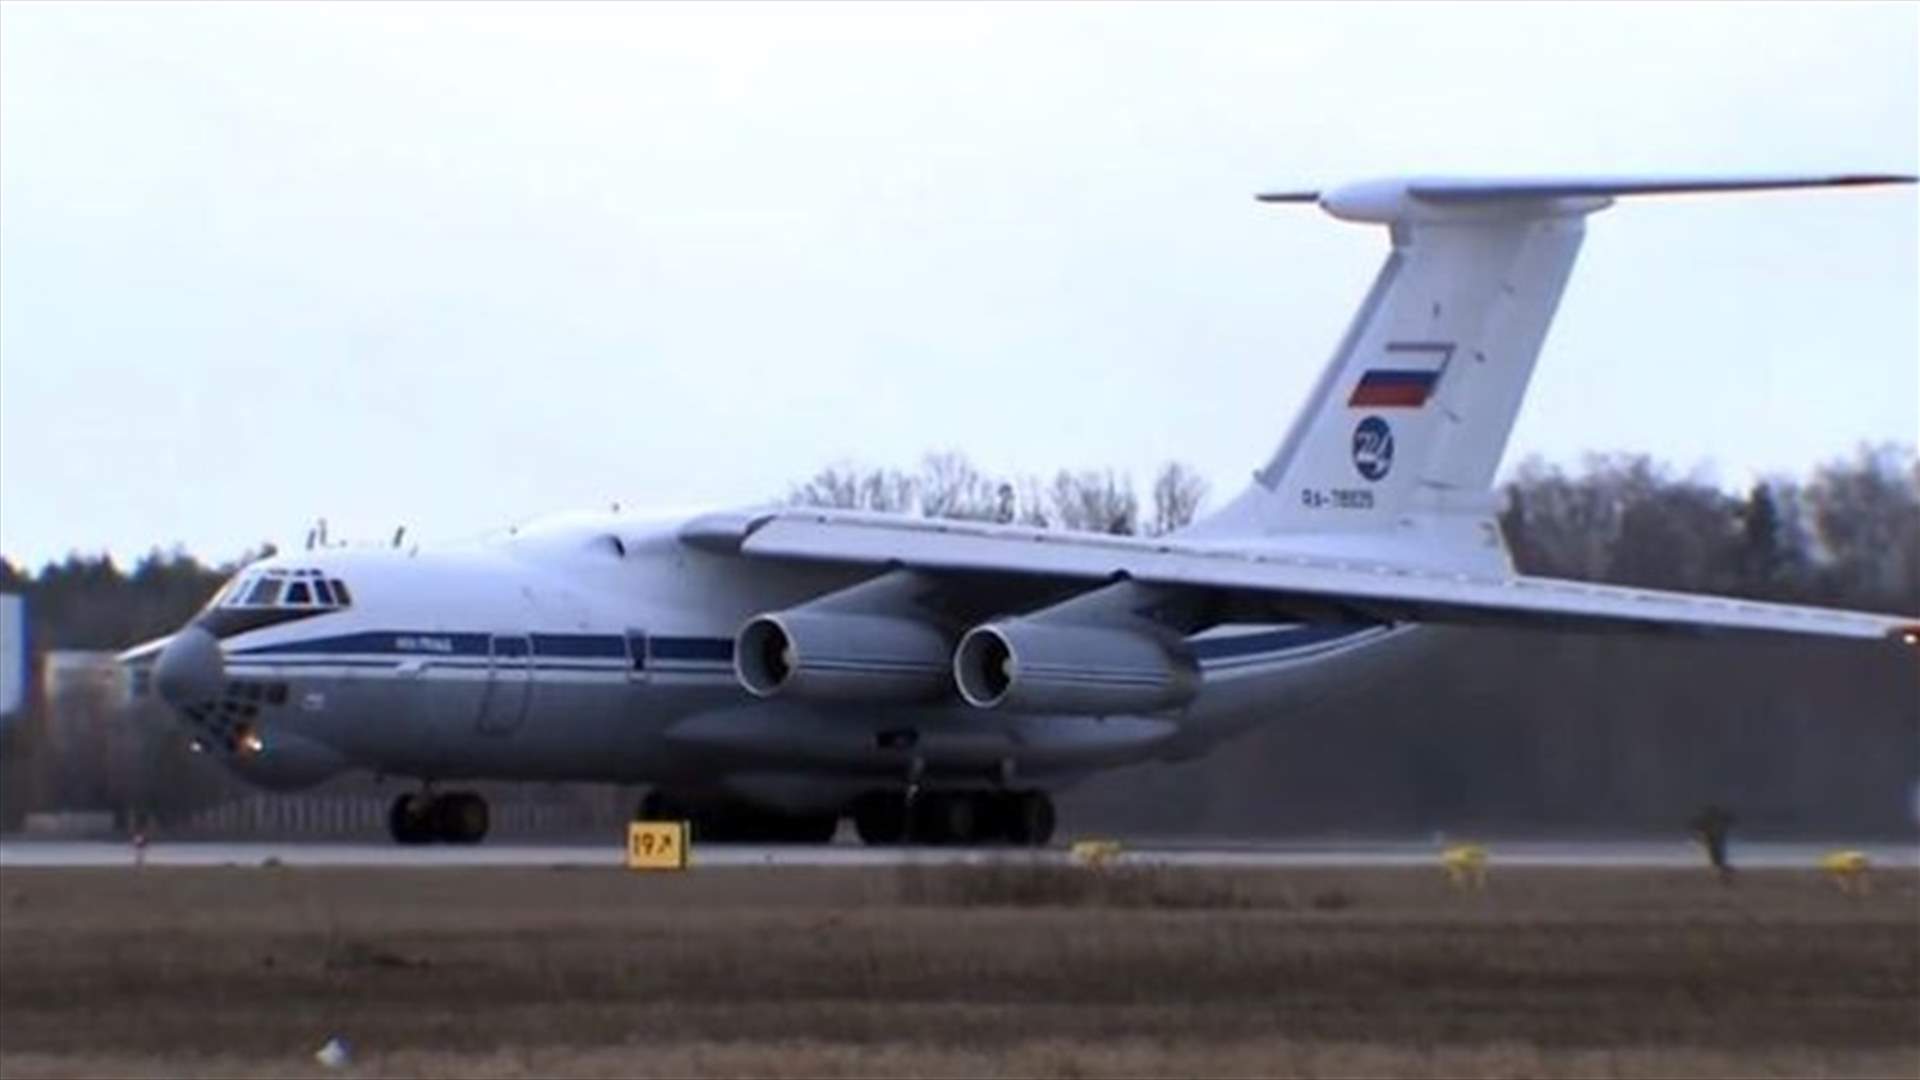 Russian plane takes off for U.S. with coronavirus help onboard